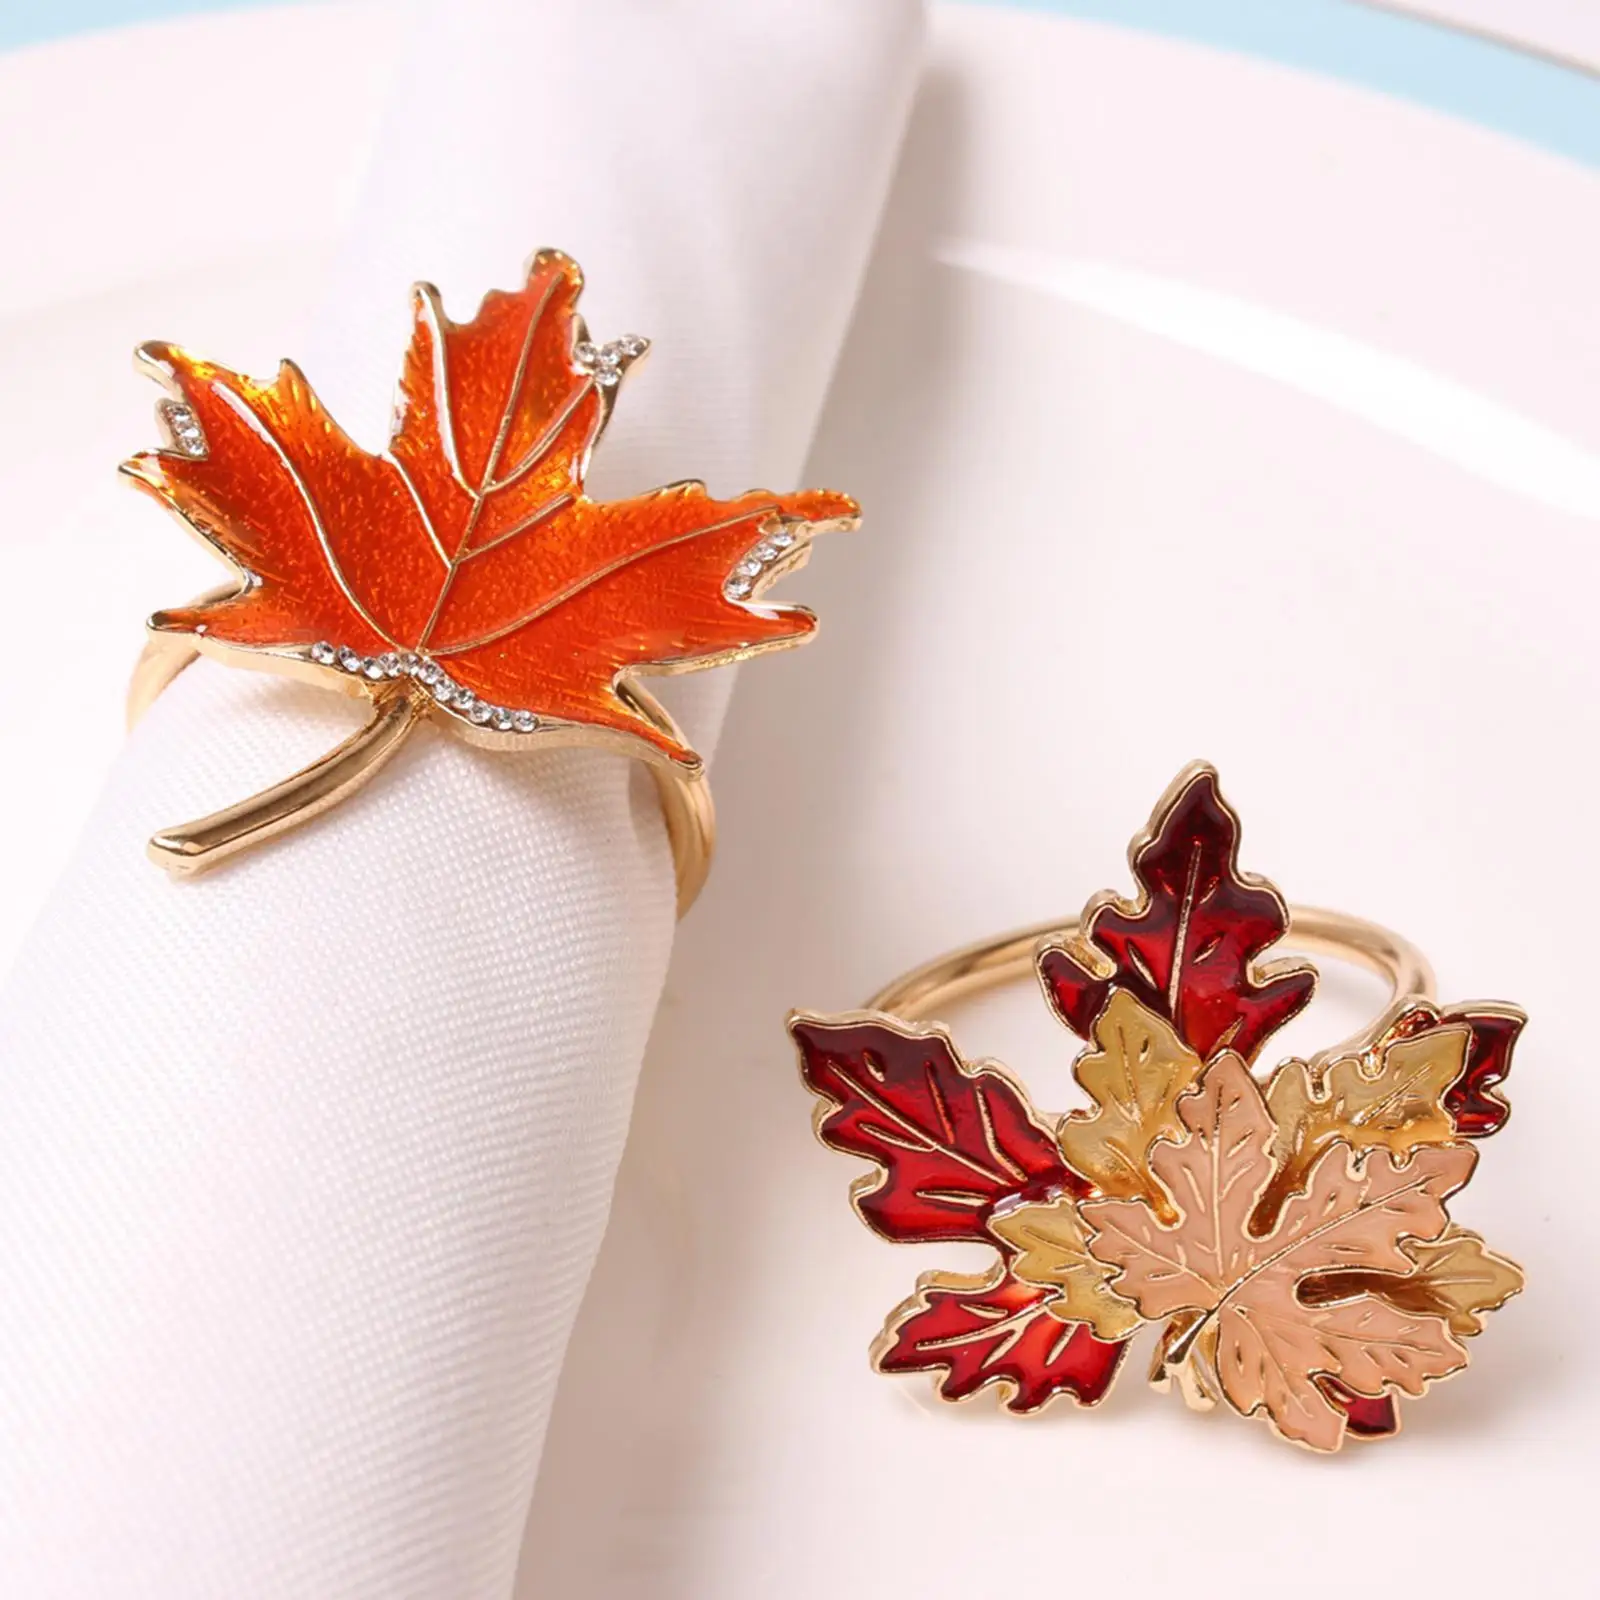 

Napkin Rings Maple Leaf Napkin Rings Holder Fall Napkin Rings For Dinner Christmas Thanksgiving Party Banquet Buffet Table F6T9